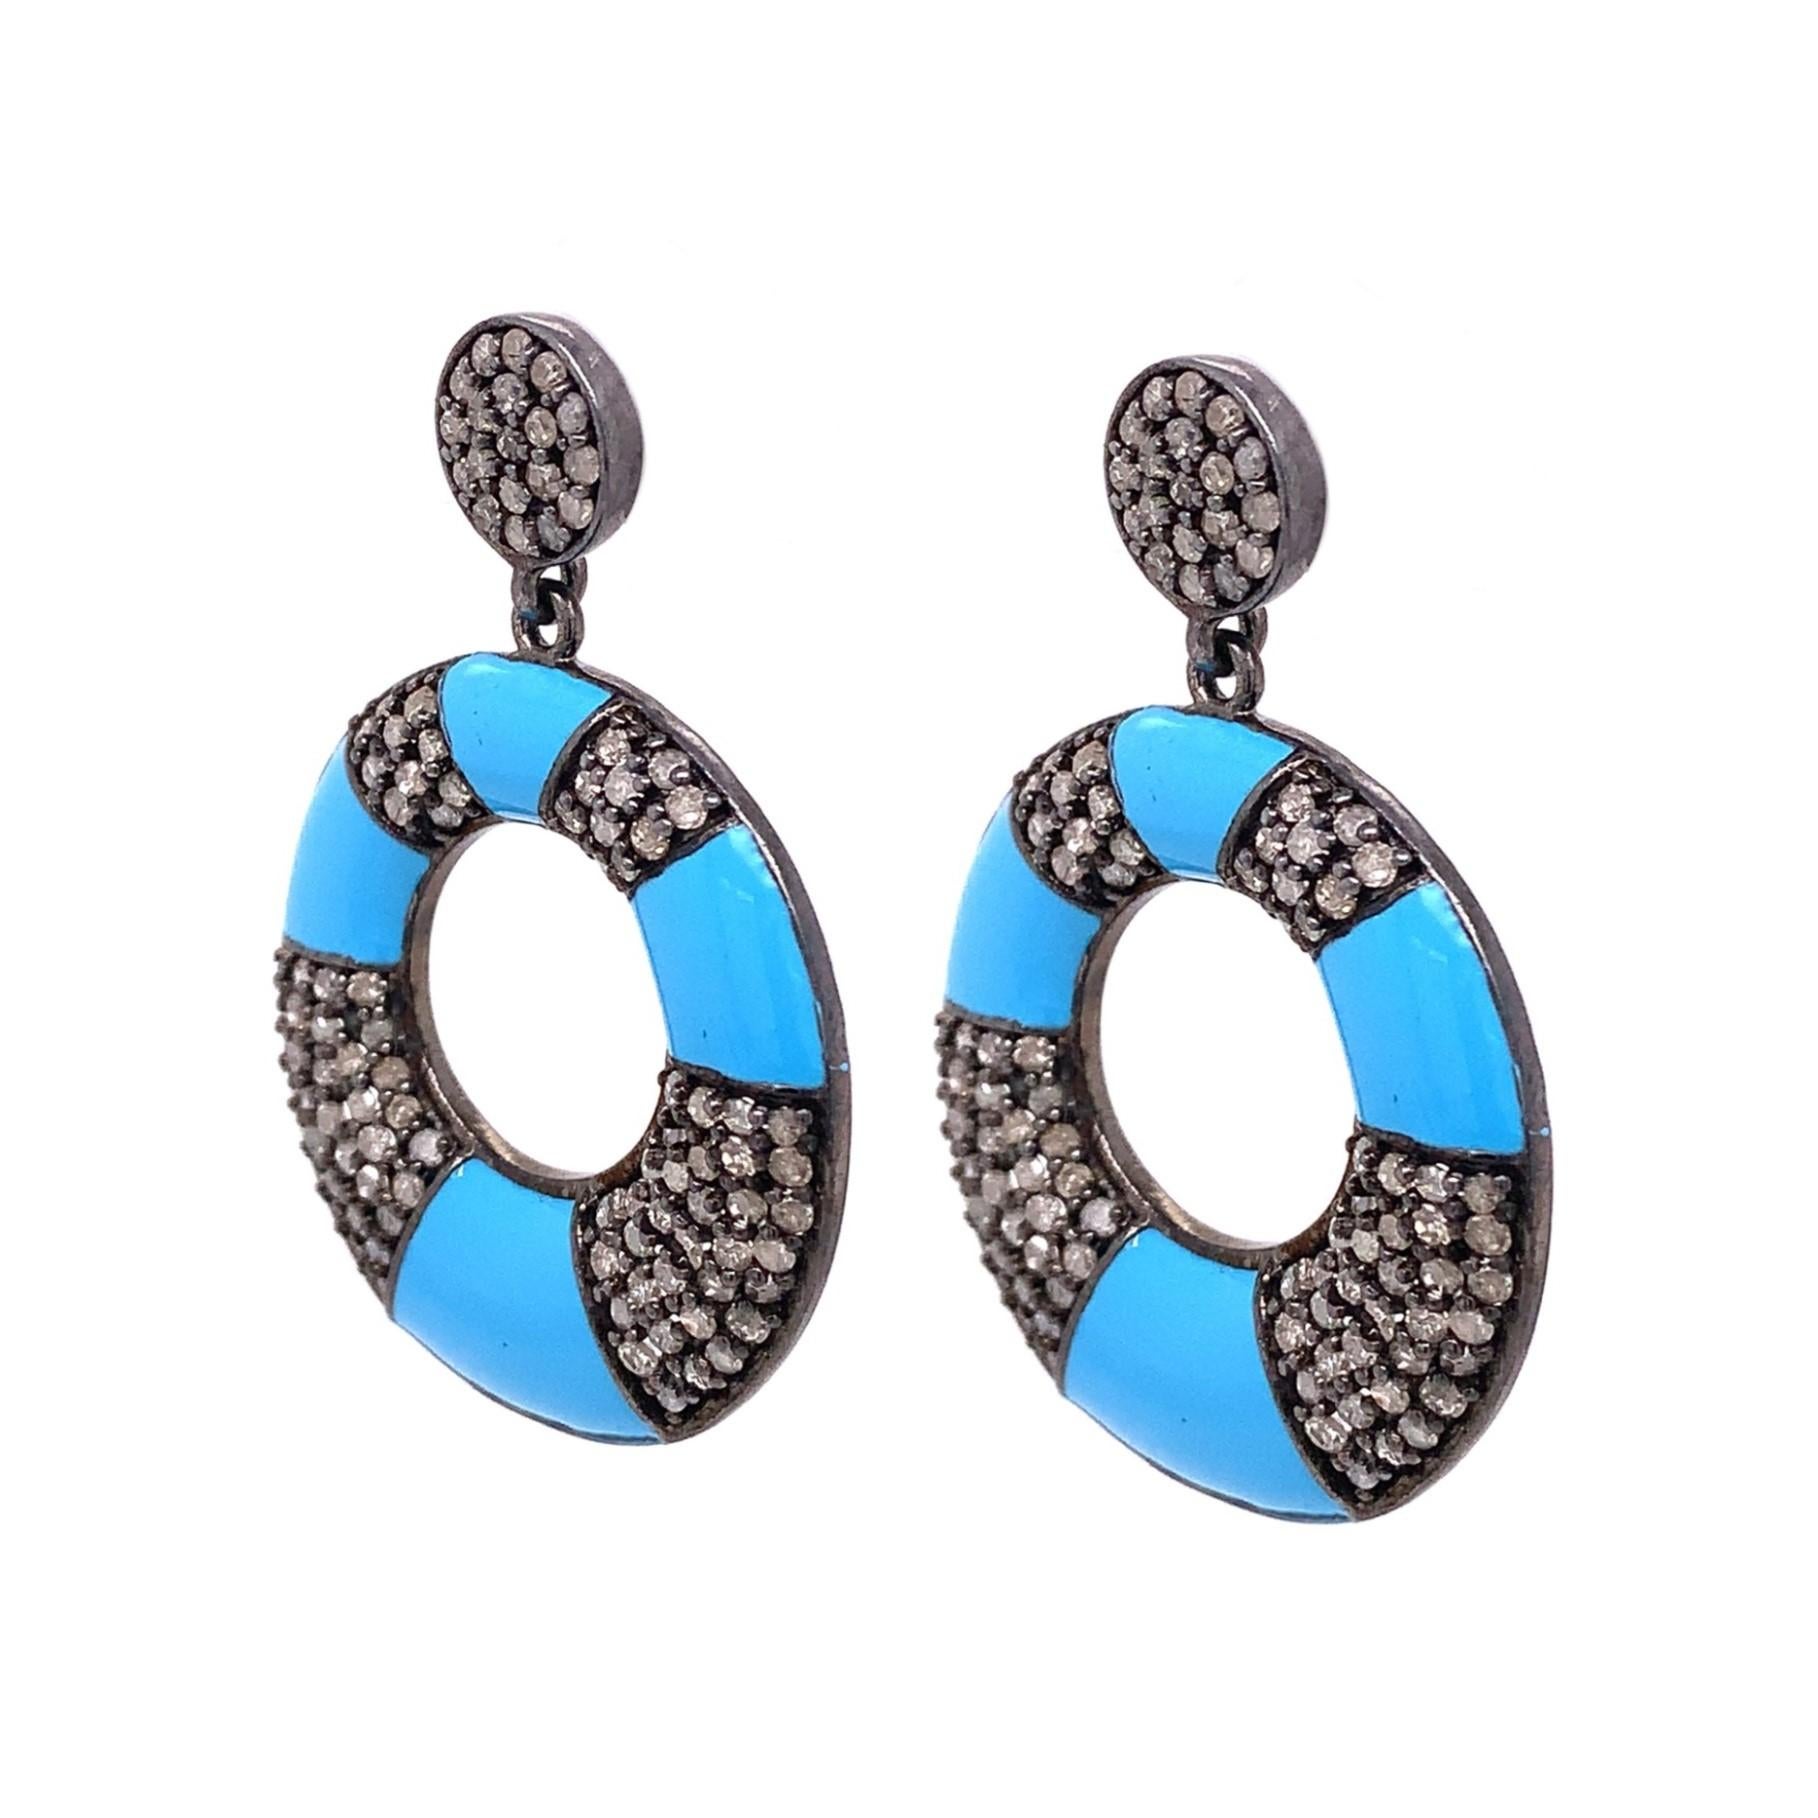 Life in color Collection

Bright  blue turquoise Enamel with icy Diamonds set in blackened Sterling Silver to create one of a kind frontal dangle earrings.

